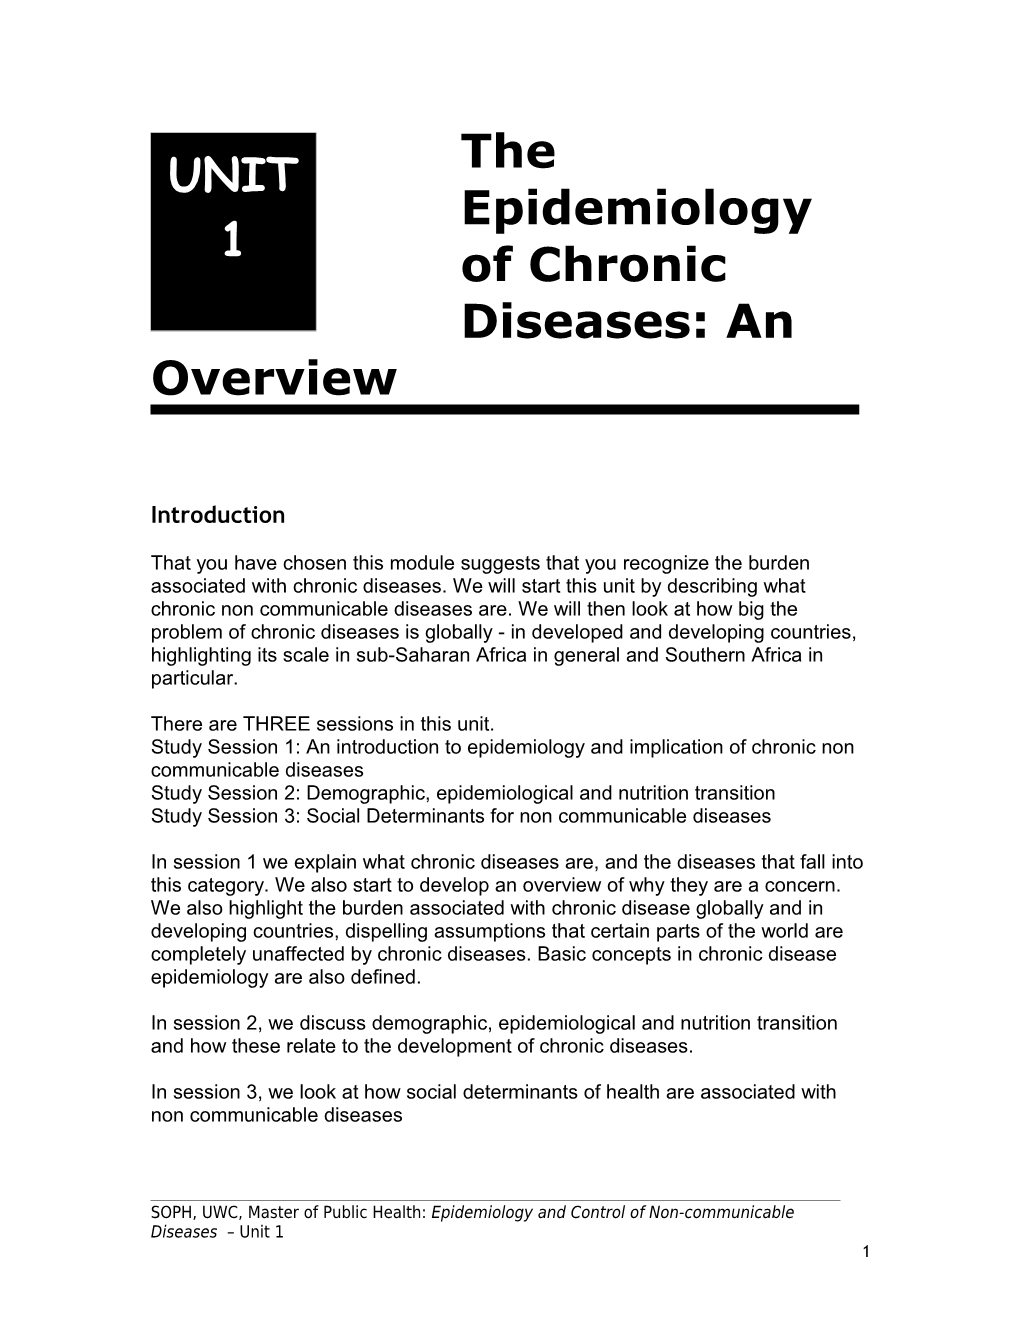 The Epidemiology of Chronic Diseases: an Overview